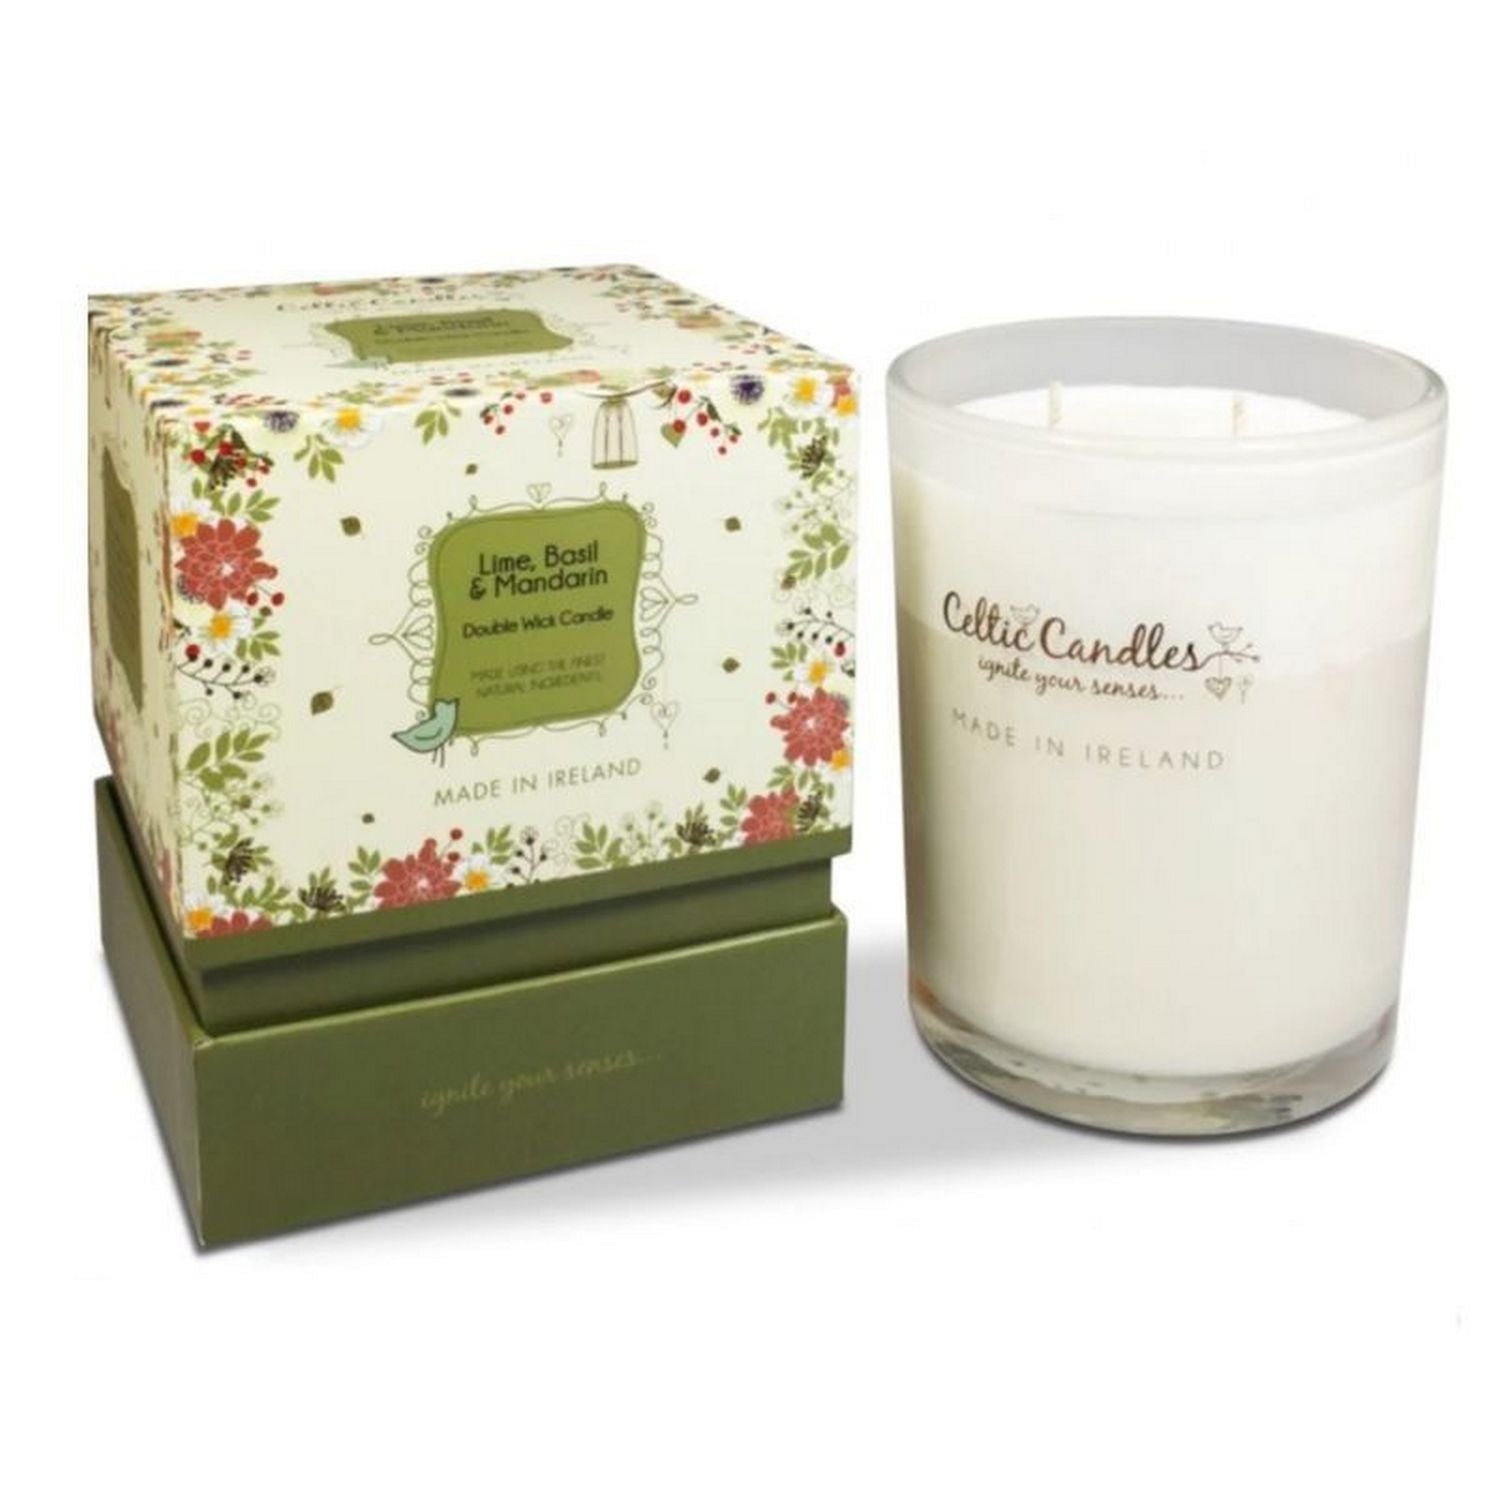 Celtic Candle Double Wick Lime Basil + Mandarin Candle